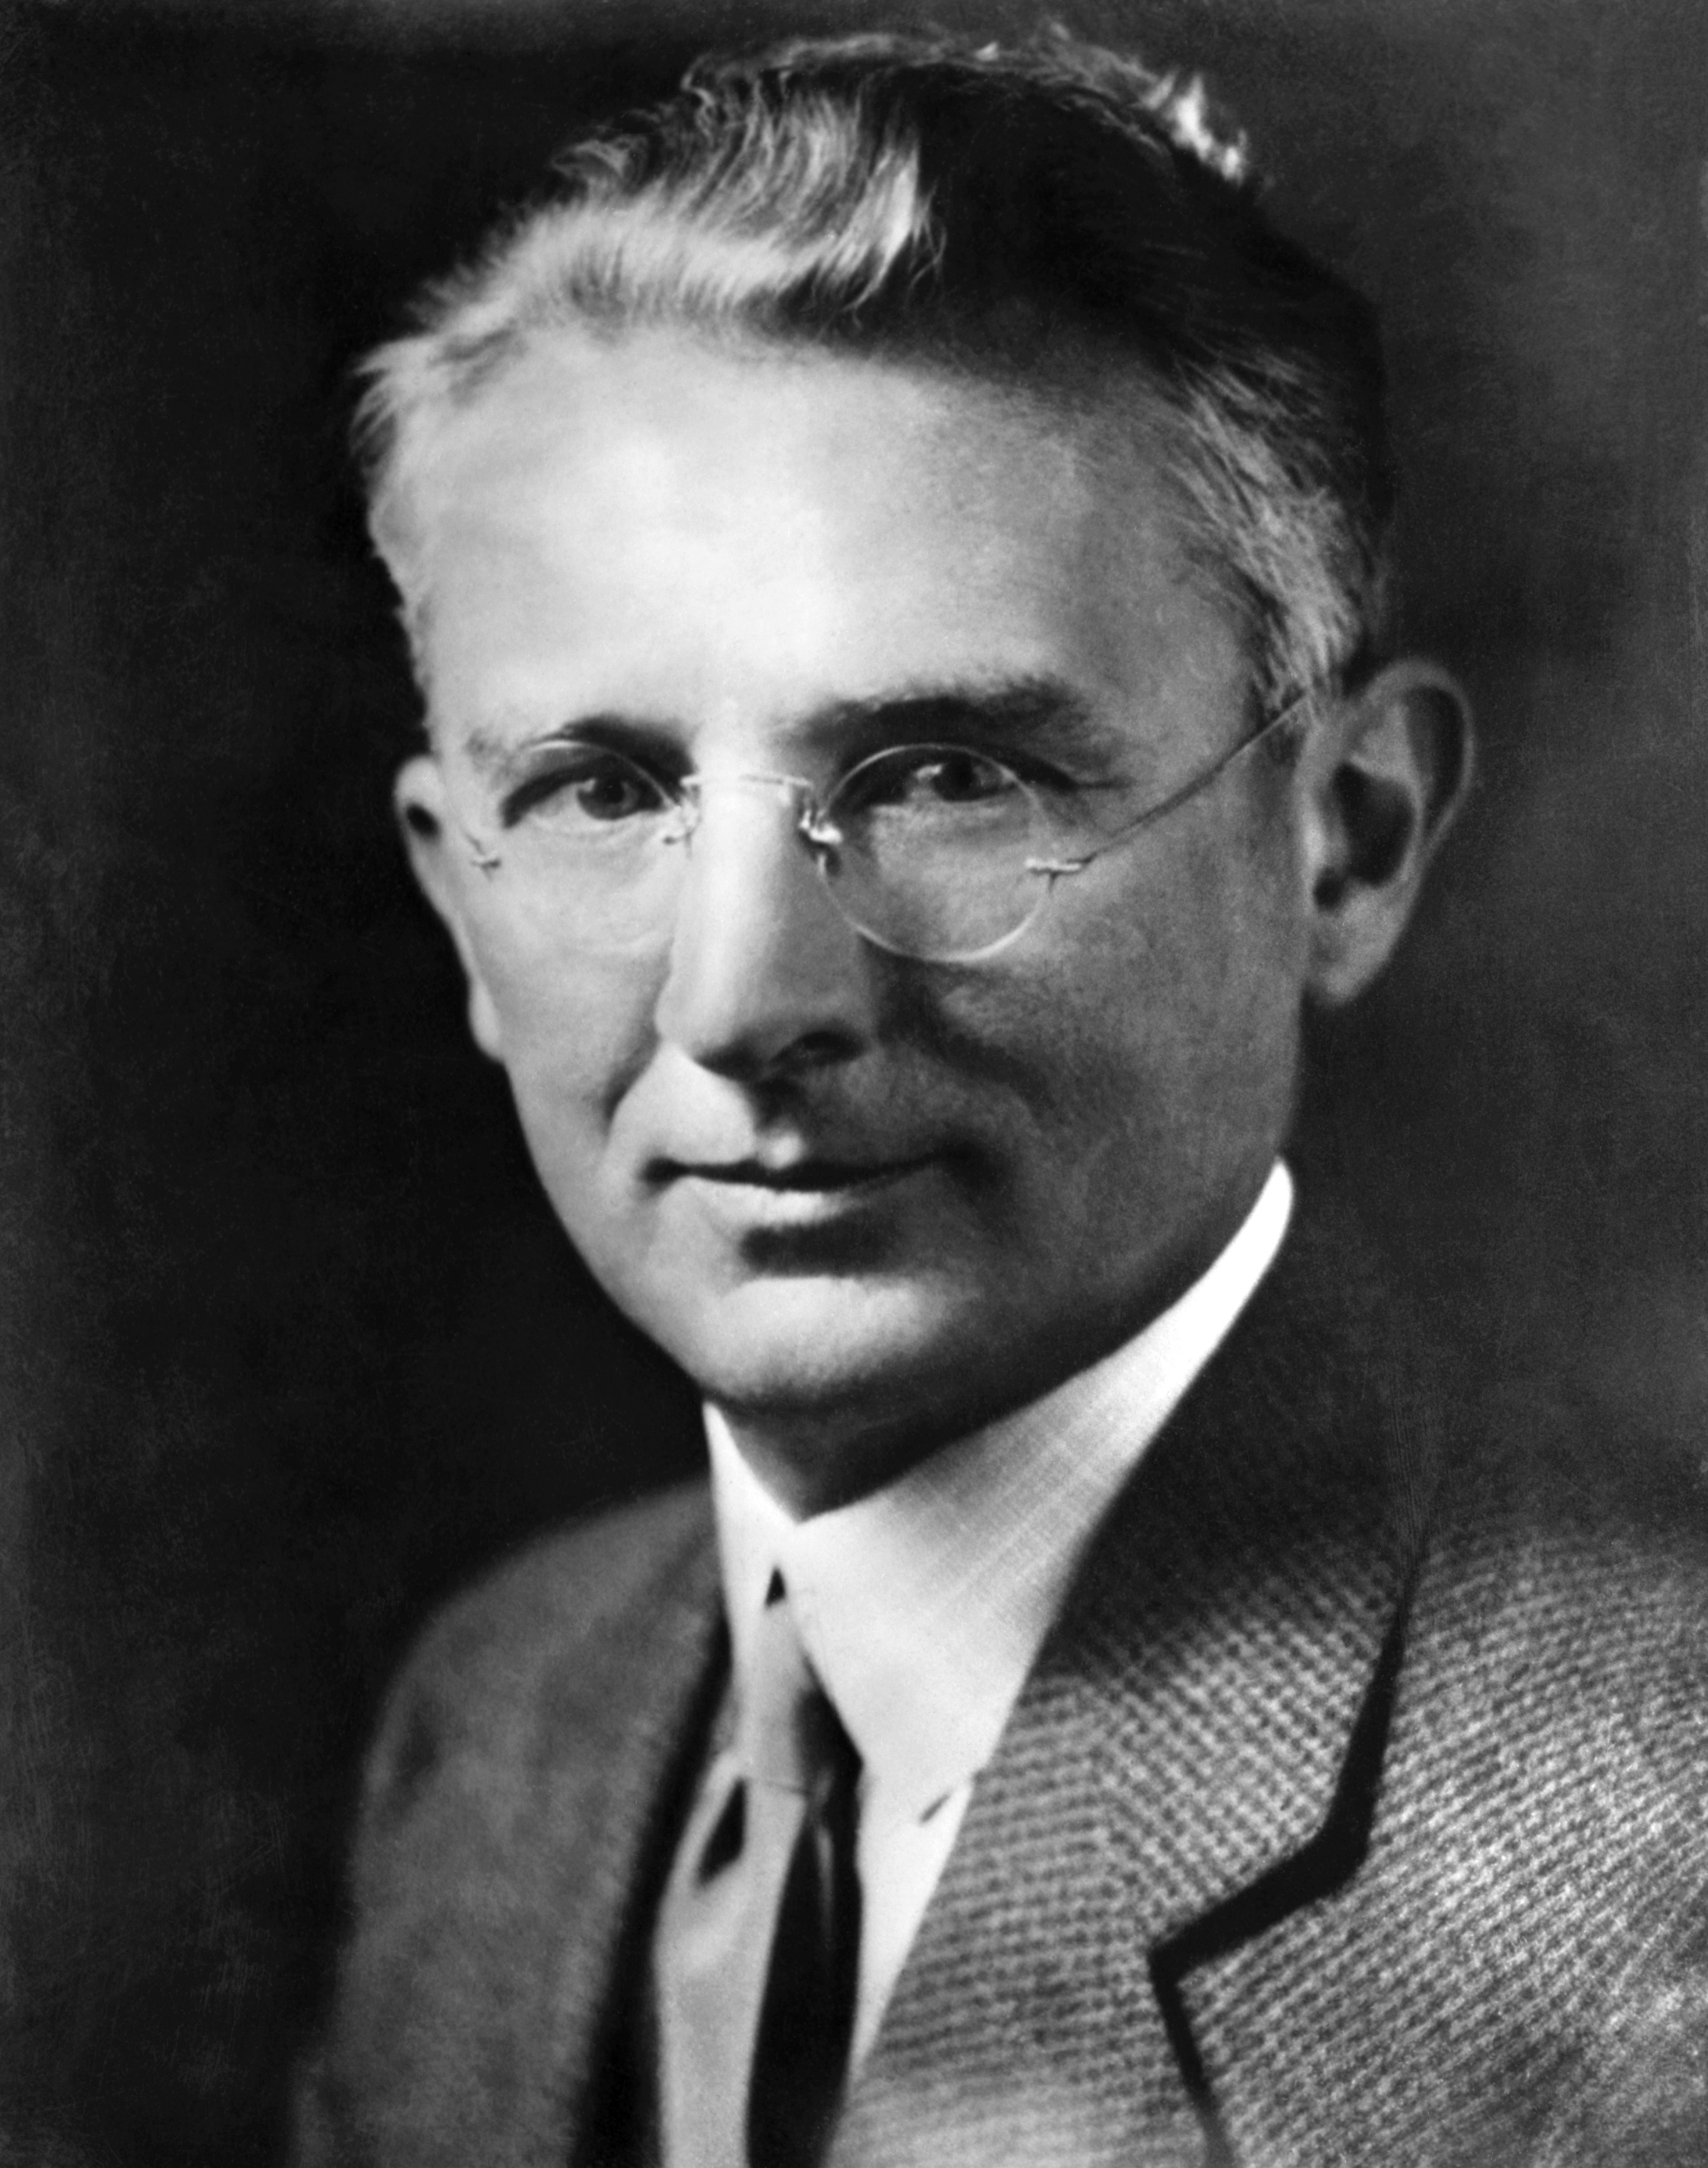 Dale Carnegie, author of &quot;How to Win Friends and Influence People.&quot; Head and shoulders portrait.